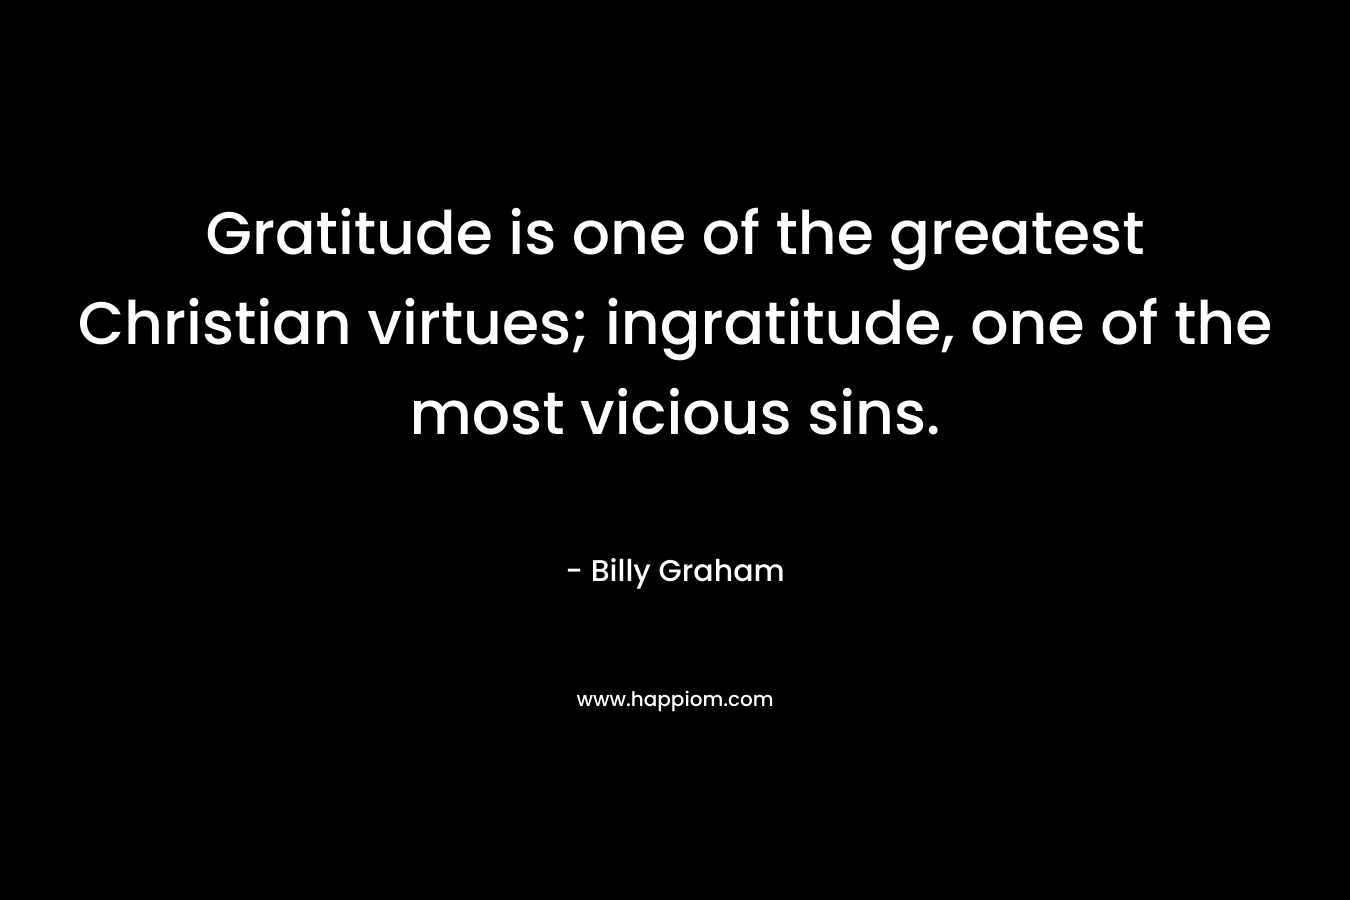 Gratitude is one of the greatest Christian virtues; ingratitude, one of the most vicious sins.